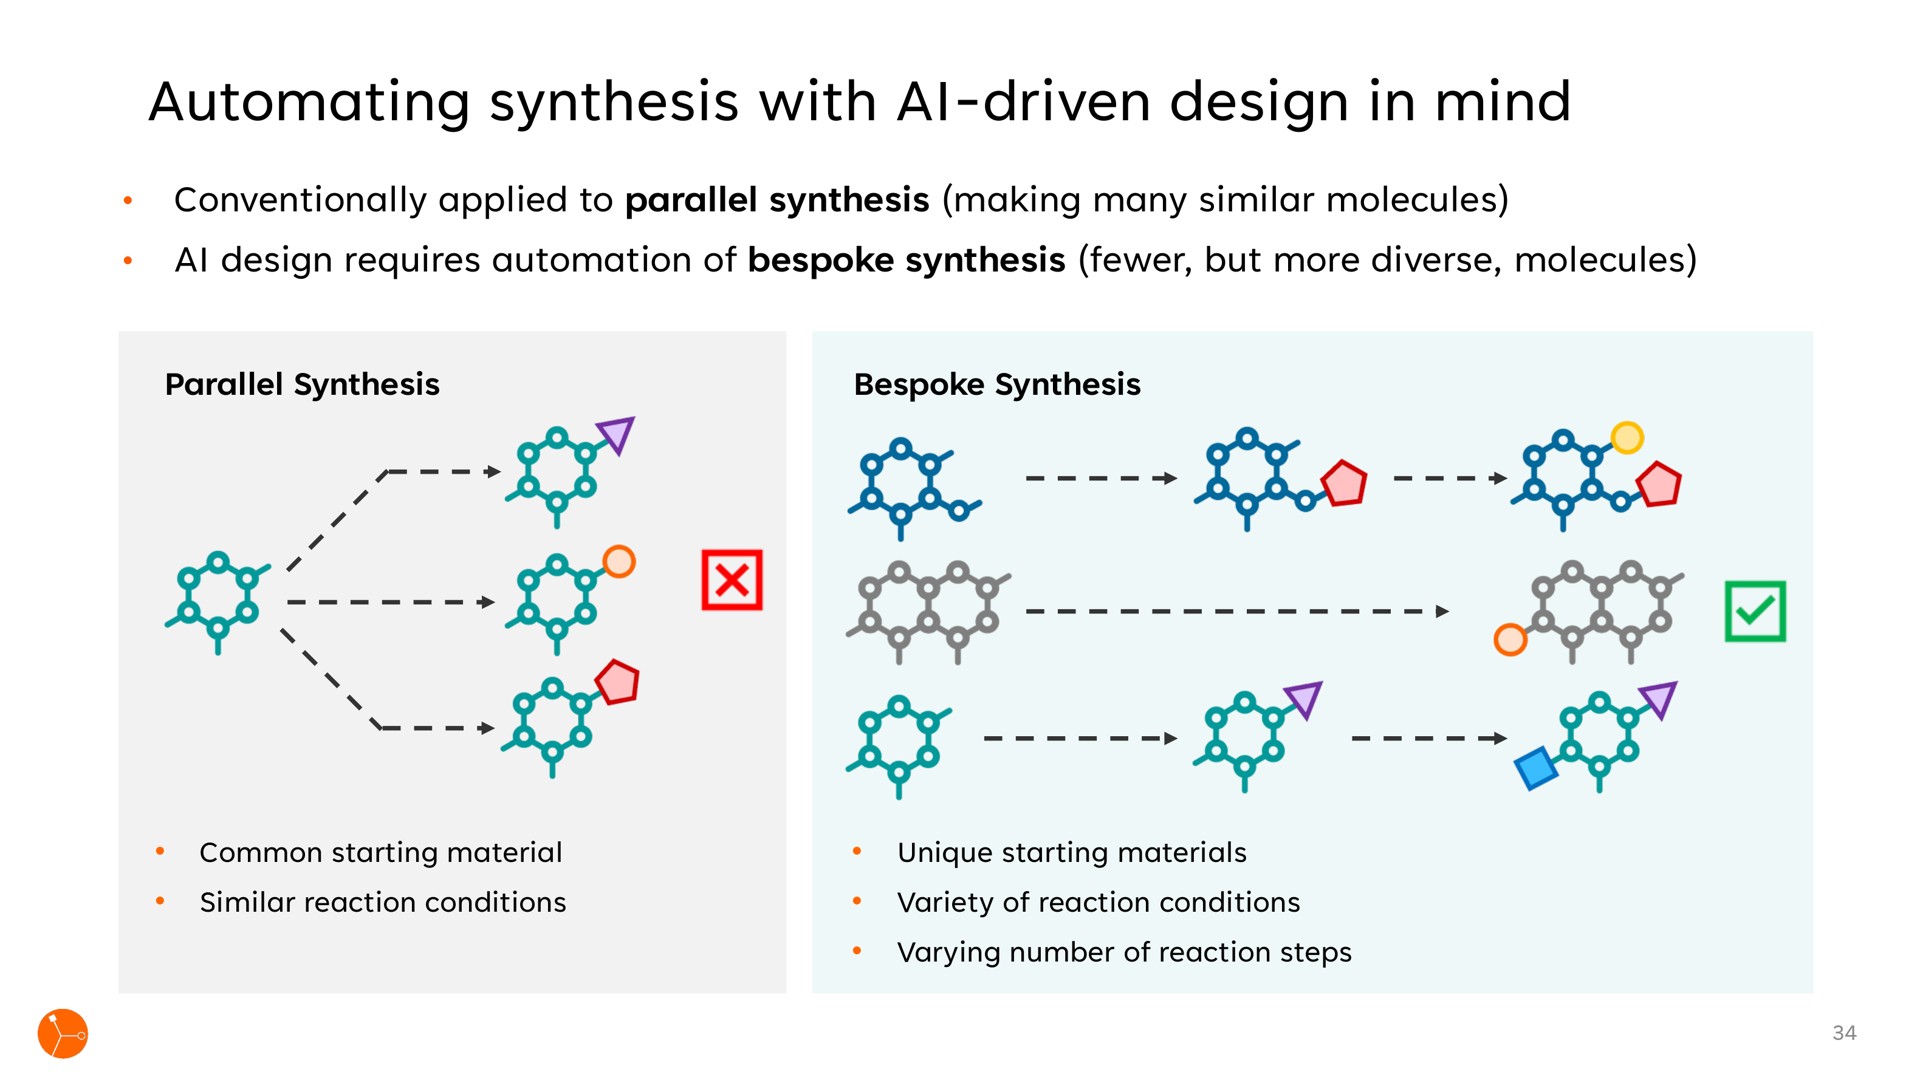 synthesis with driven design in mind | Exscientia